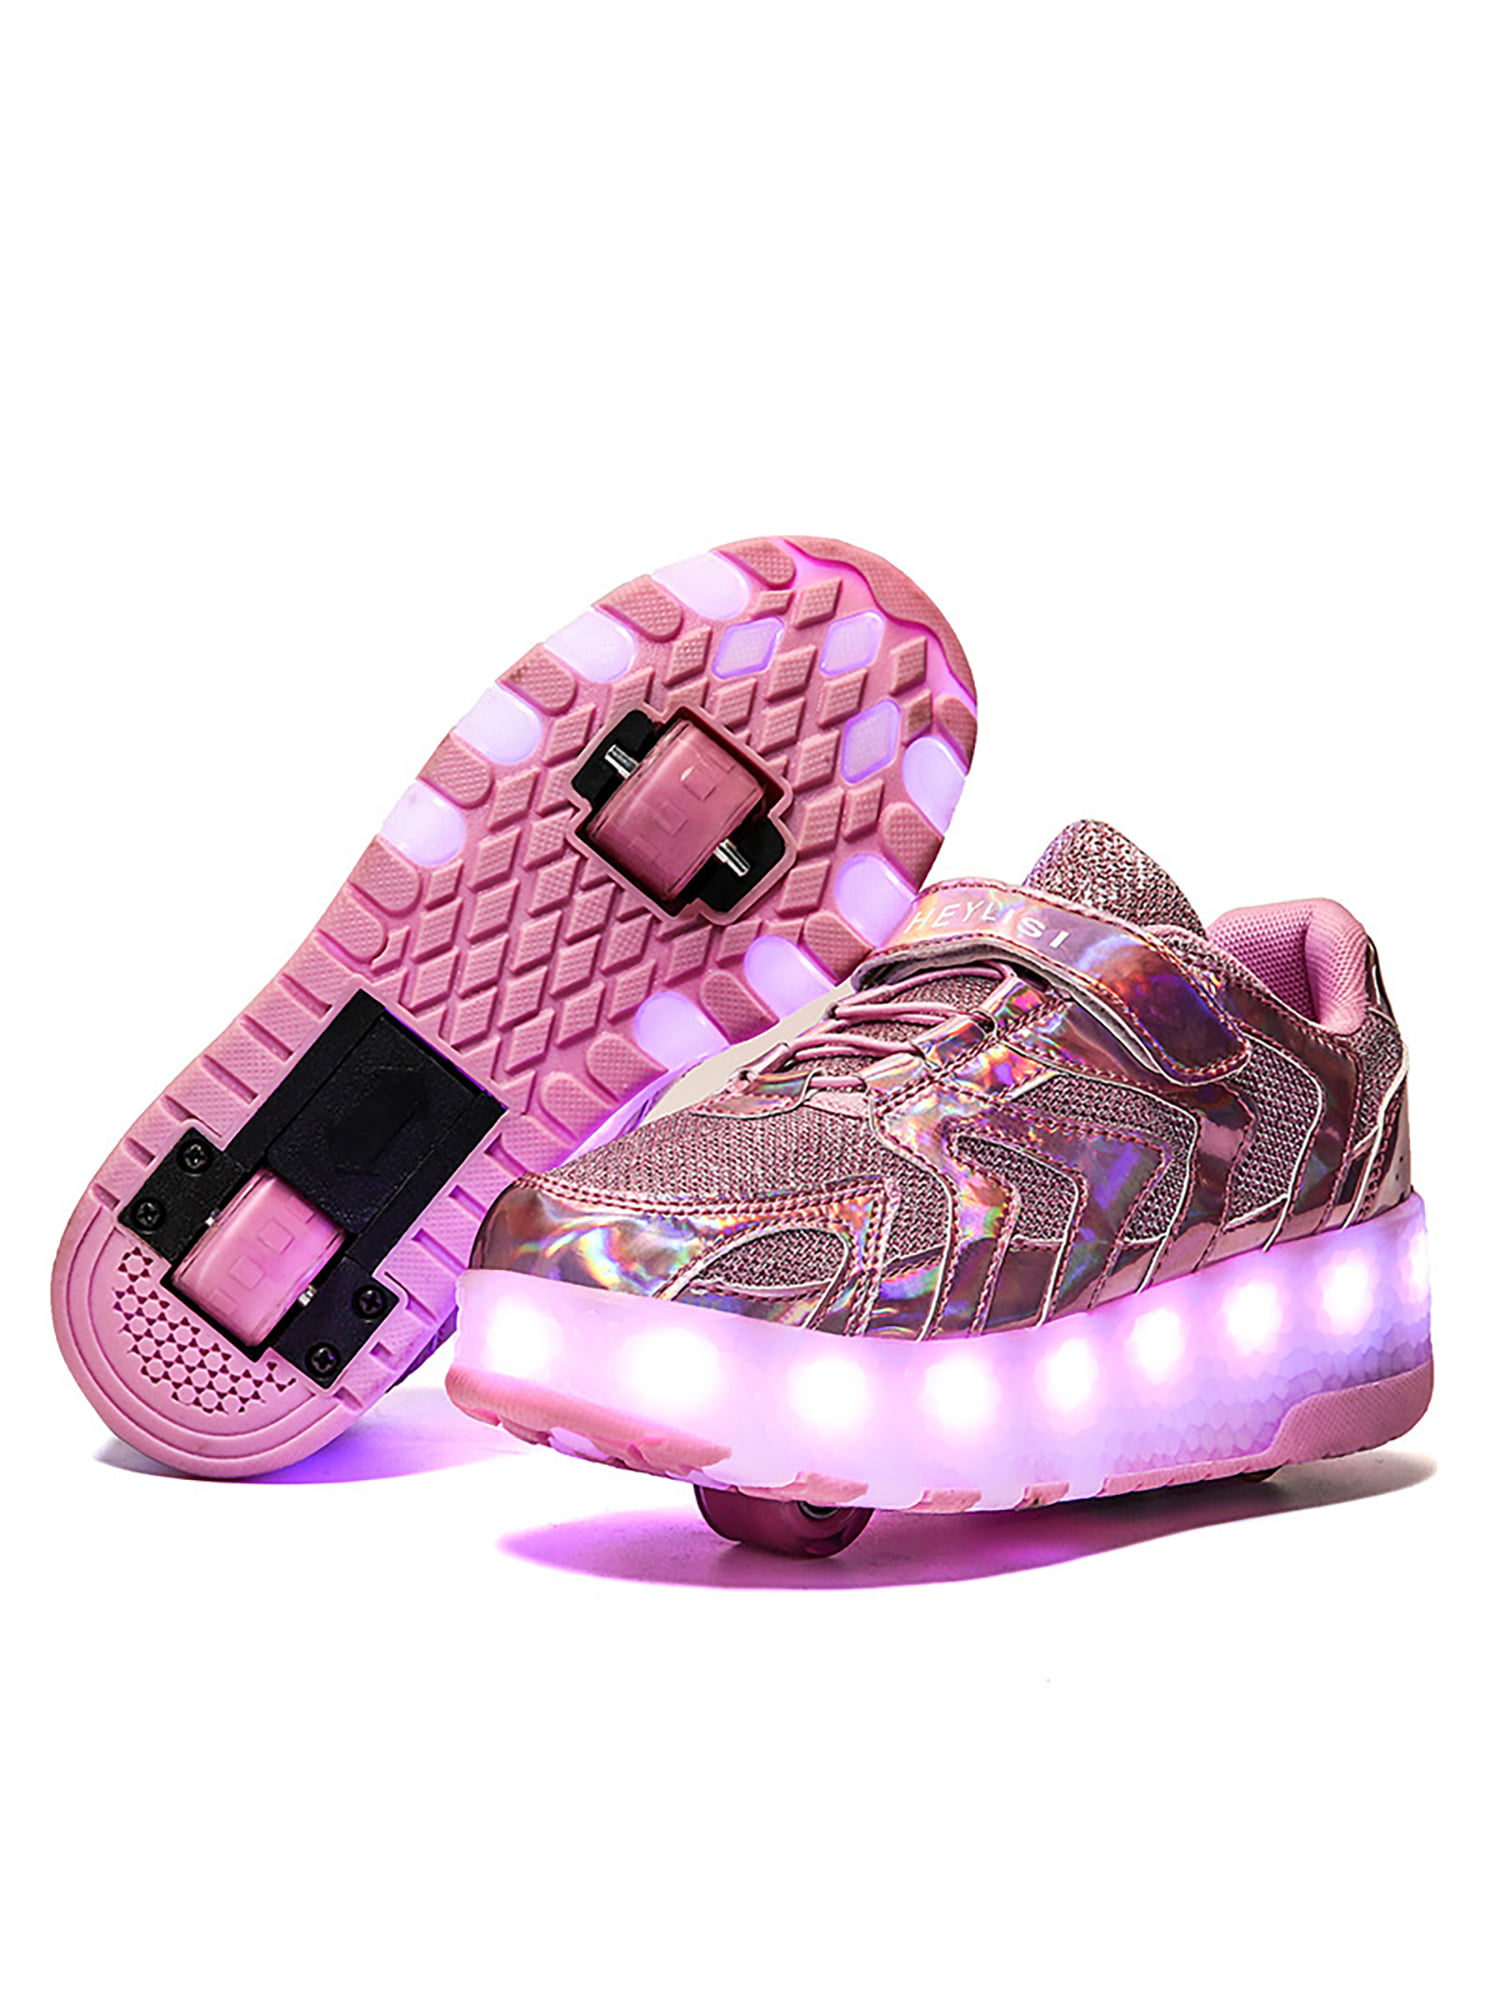 Kids Novelty LED Light Up Shoes Lightweight Tennis Shoes Sneakers 1-6 Years Mesh Breathable Running Shoes 